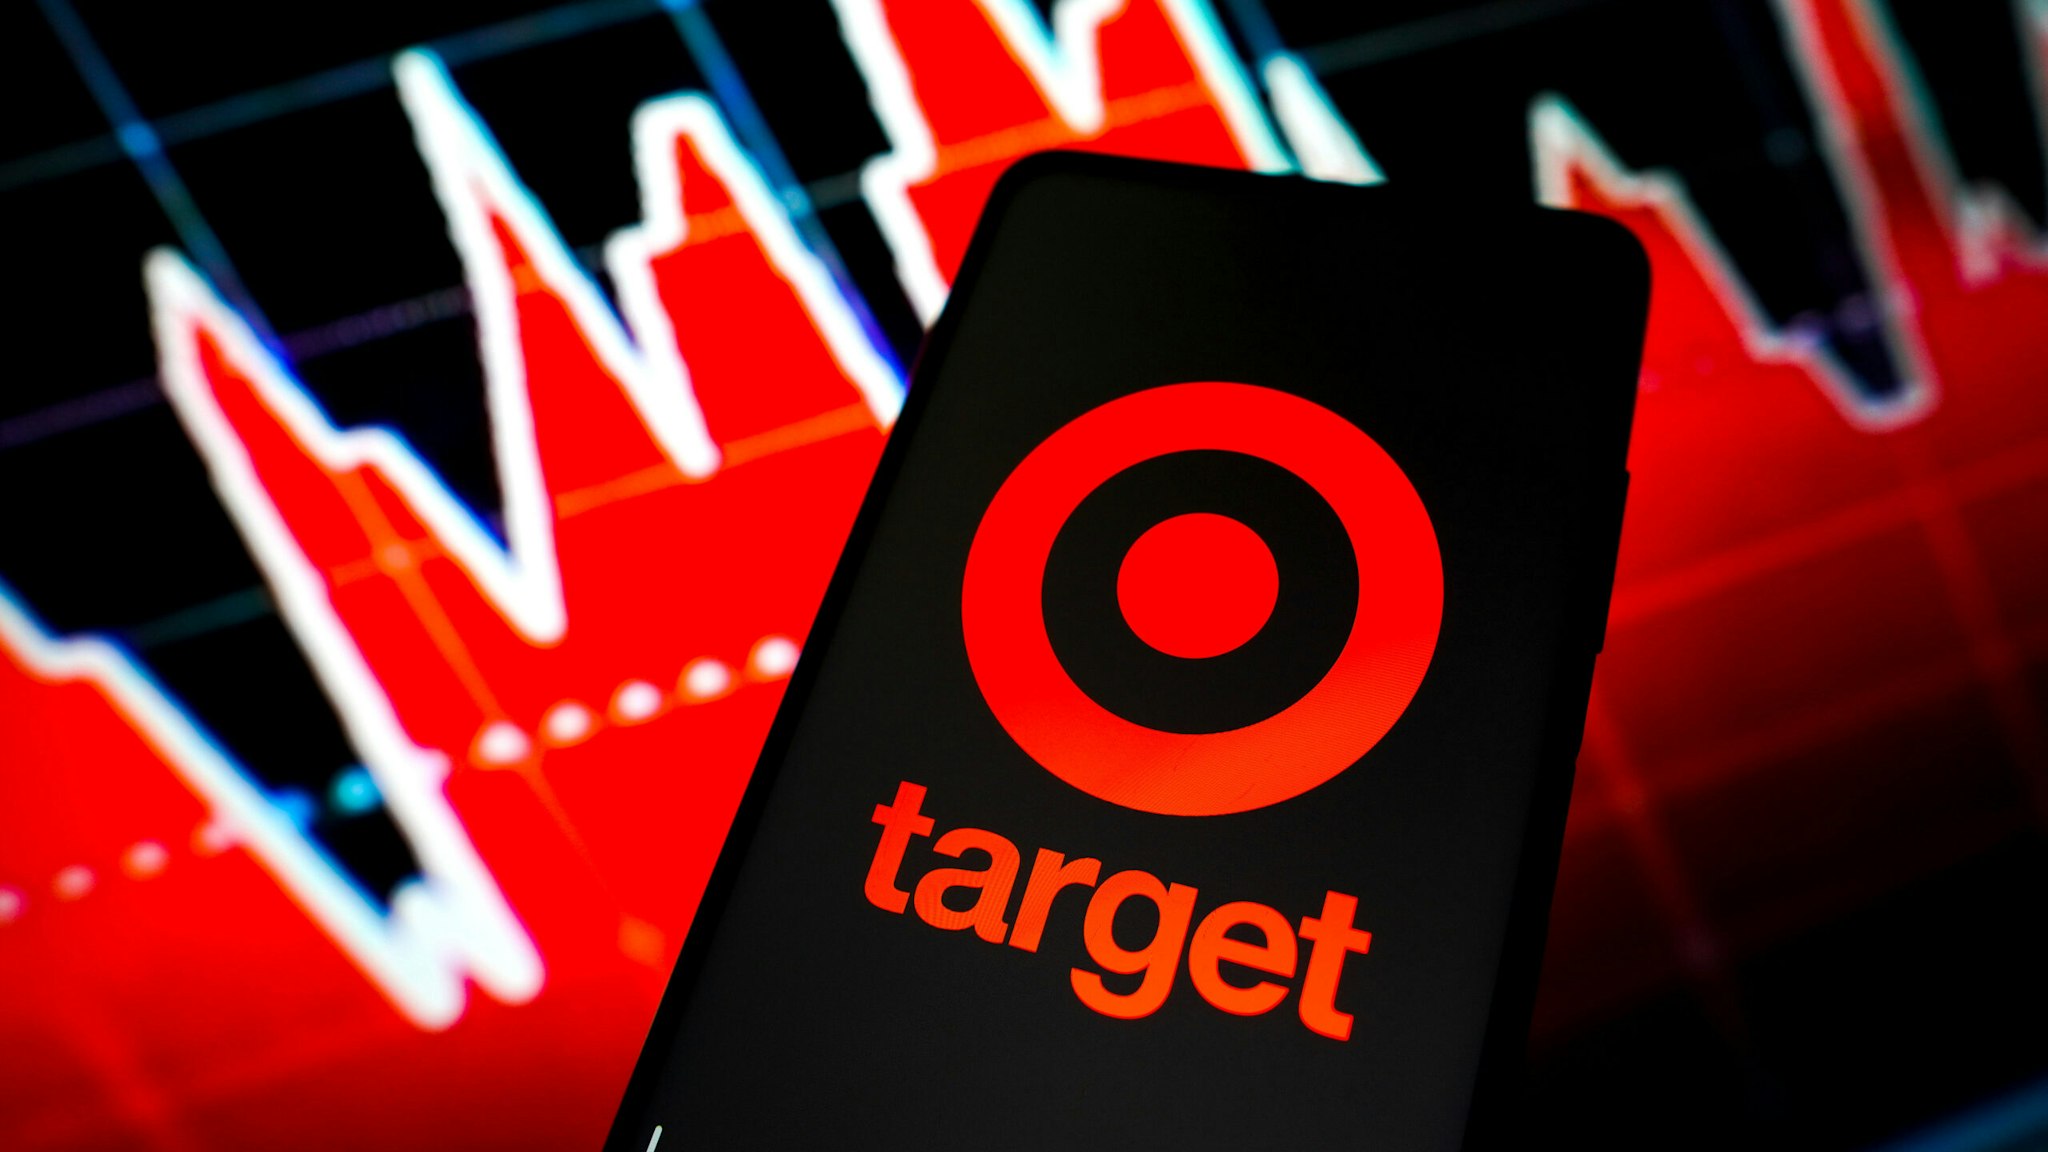 BRAZIL - 2022/05/18: In this photo illustration, the Target Corporation logo seen displayed on a smartphone screen.